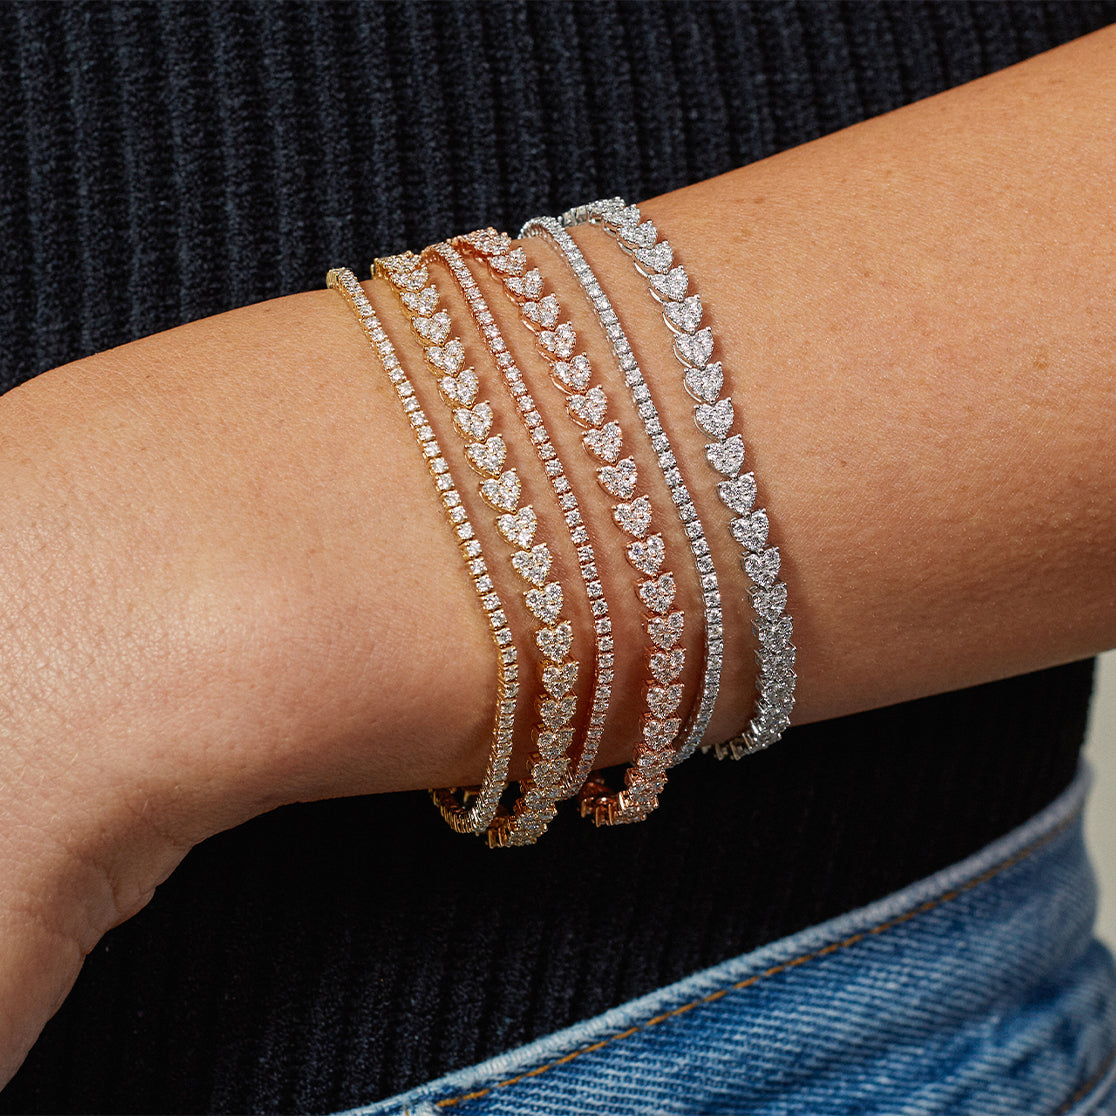 Endless Love Eternity Bracelet styled on the wrist in all finishes 